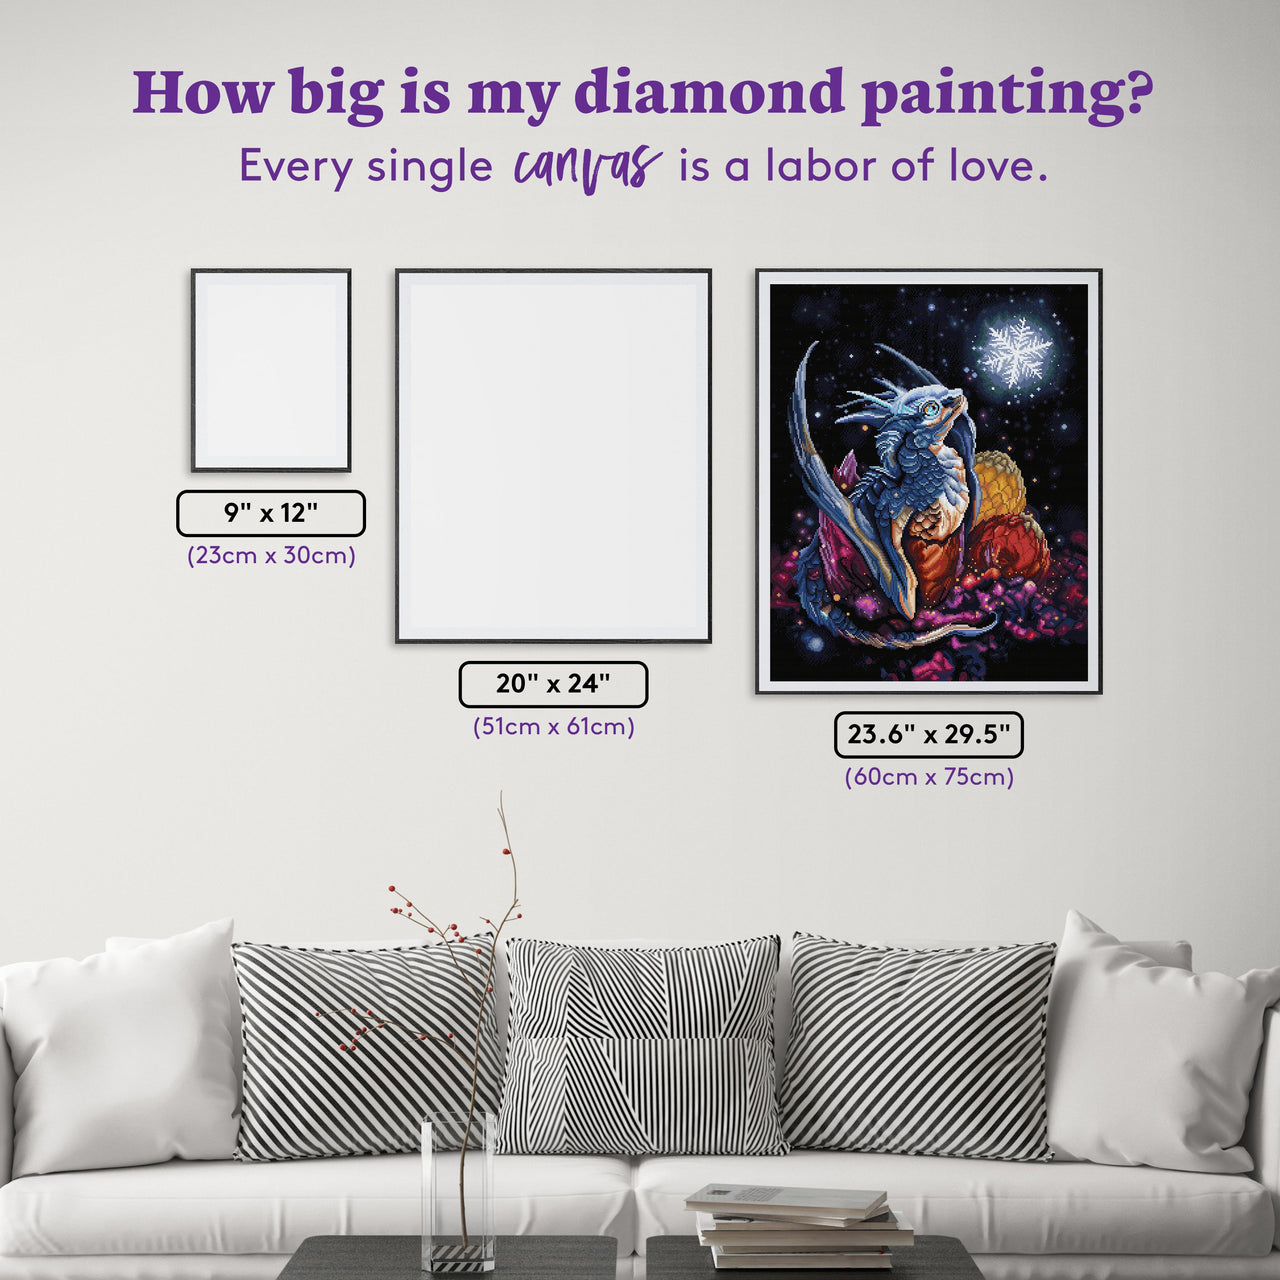 Diamond Painting Fire and Ice 23.6" x 29.5" (60cm x 75cm) / Square with 65 Colors including 2 ABs, 3 Fairy Dust Diamonds, and 1 Iridescent Diamond / 72,541